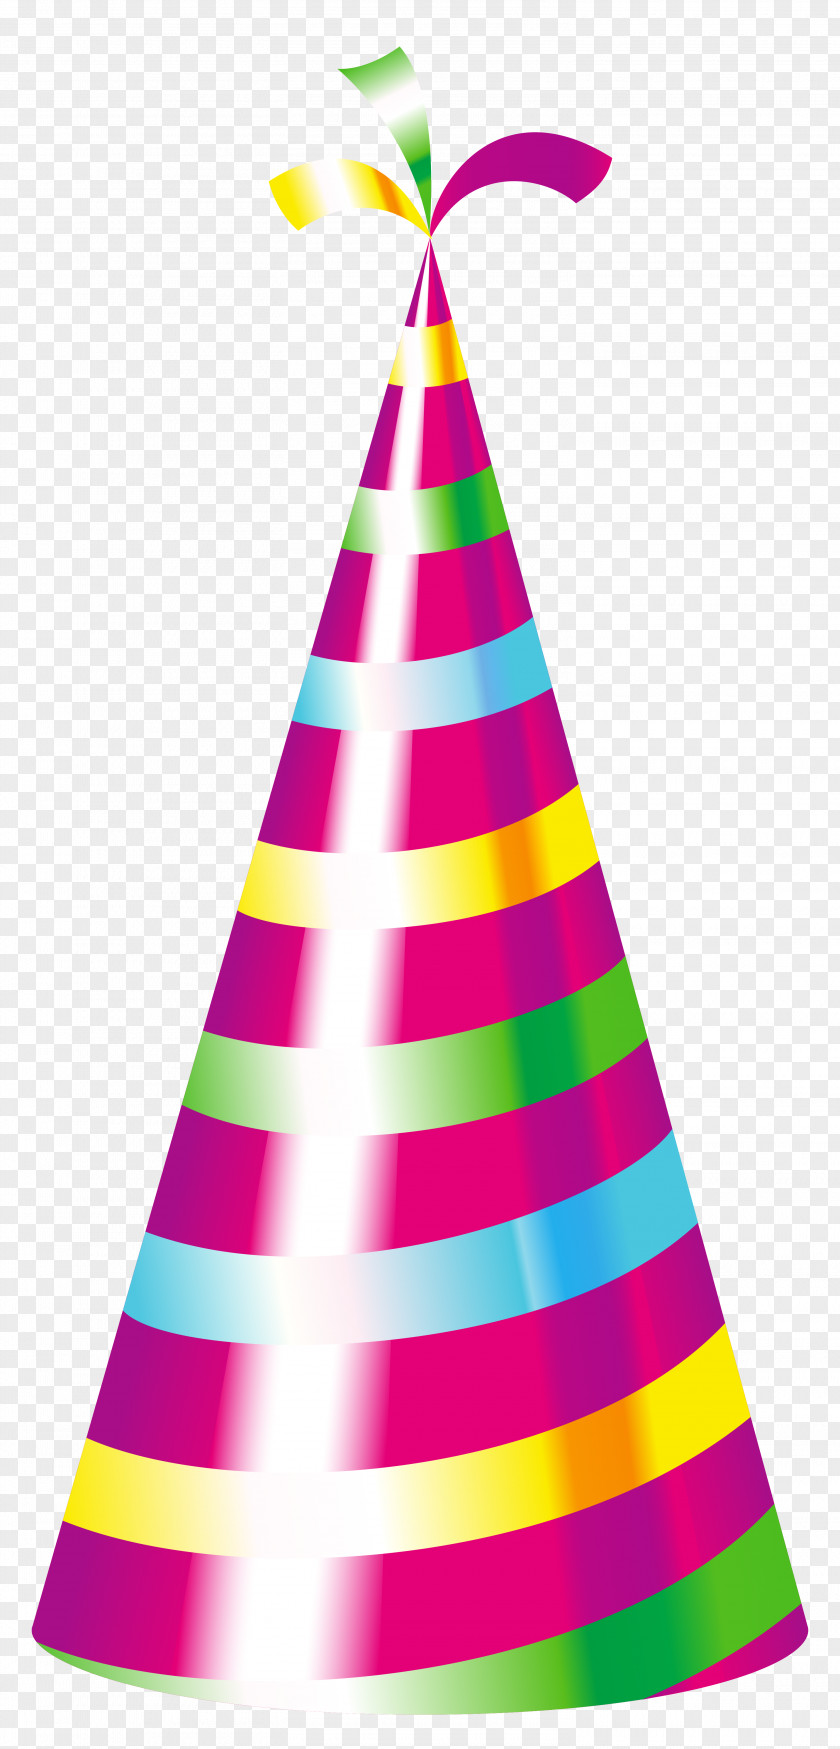 Party Hat Clipart Image Birthday Clip Art PNG